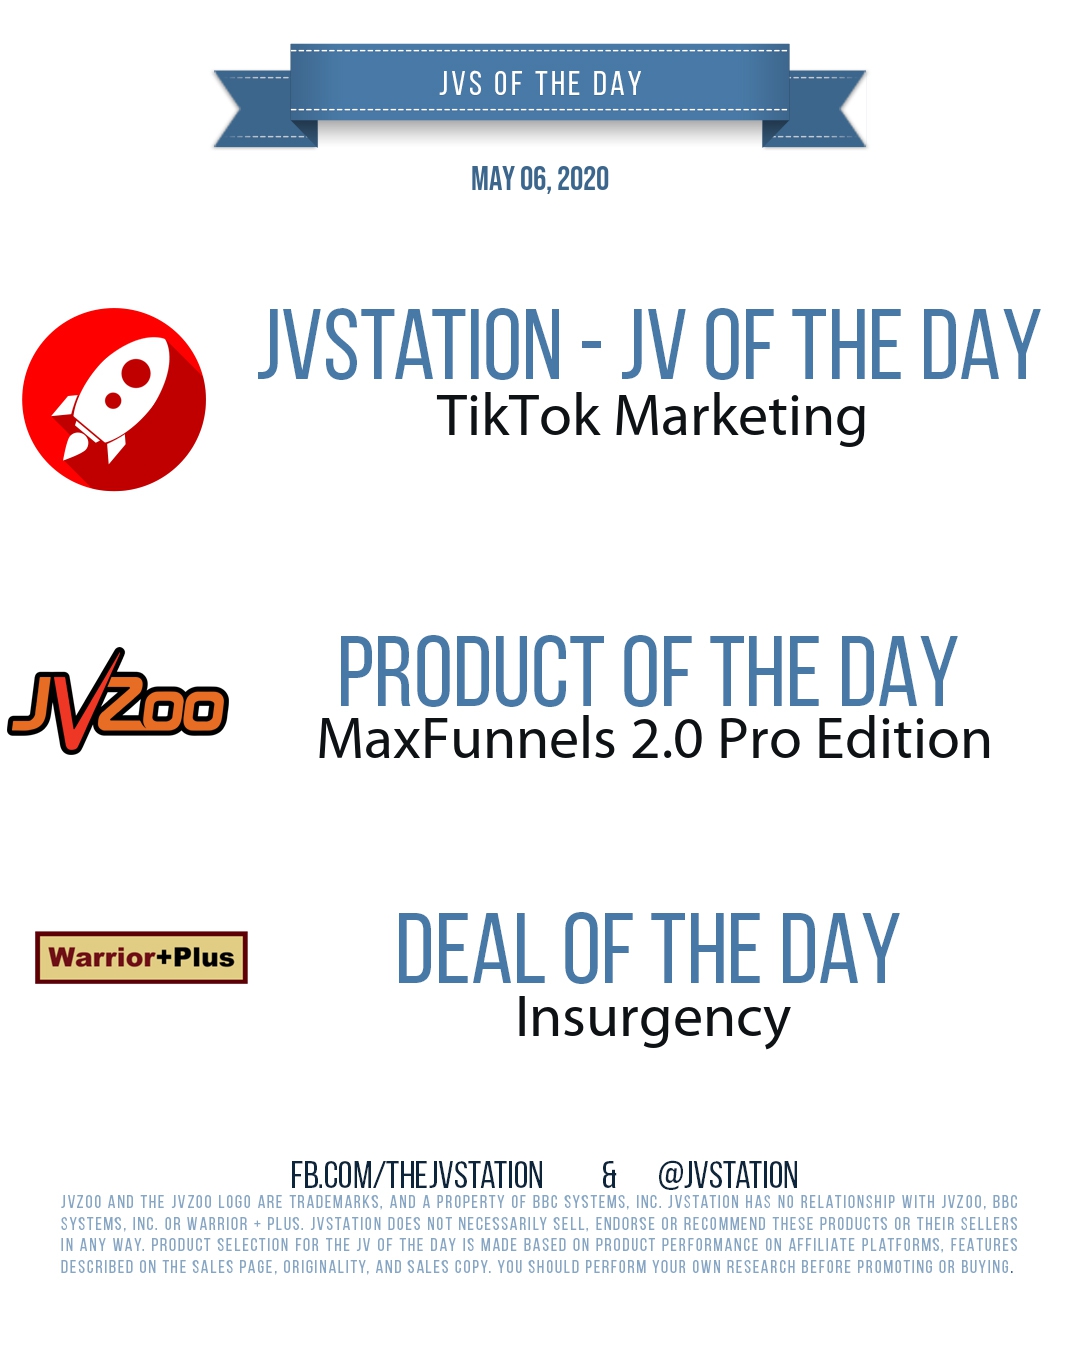 JVs of the day - May 06, 2020